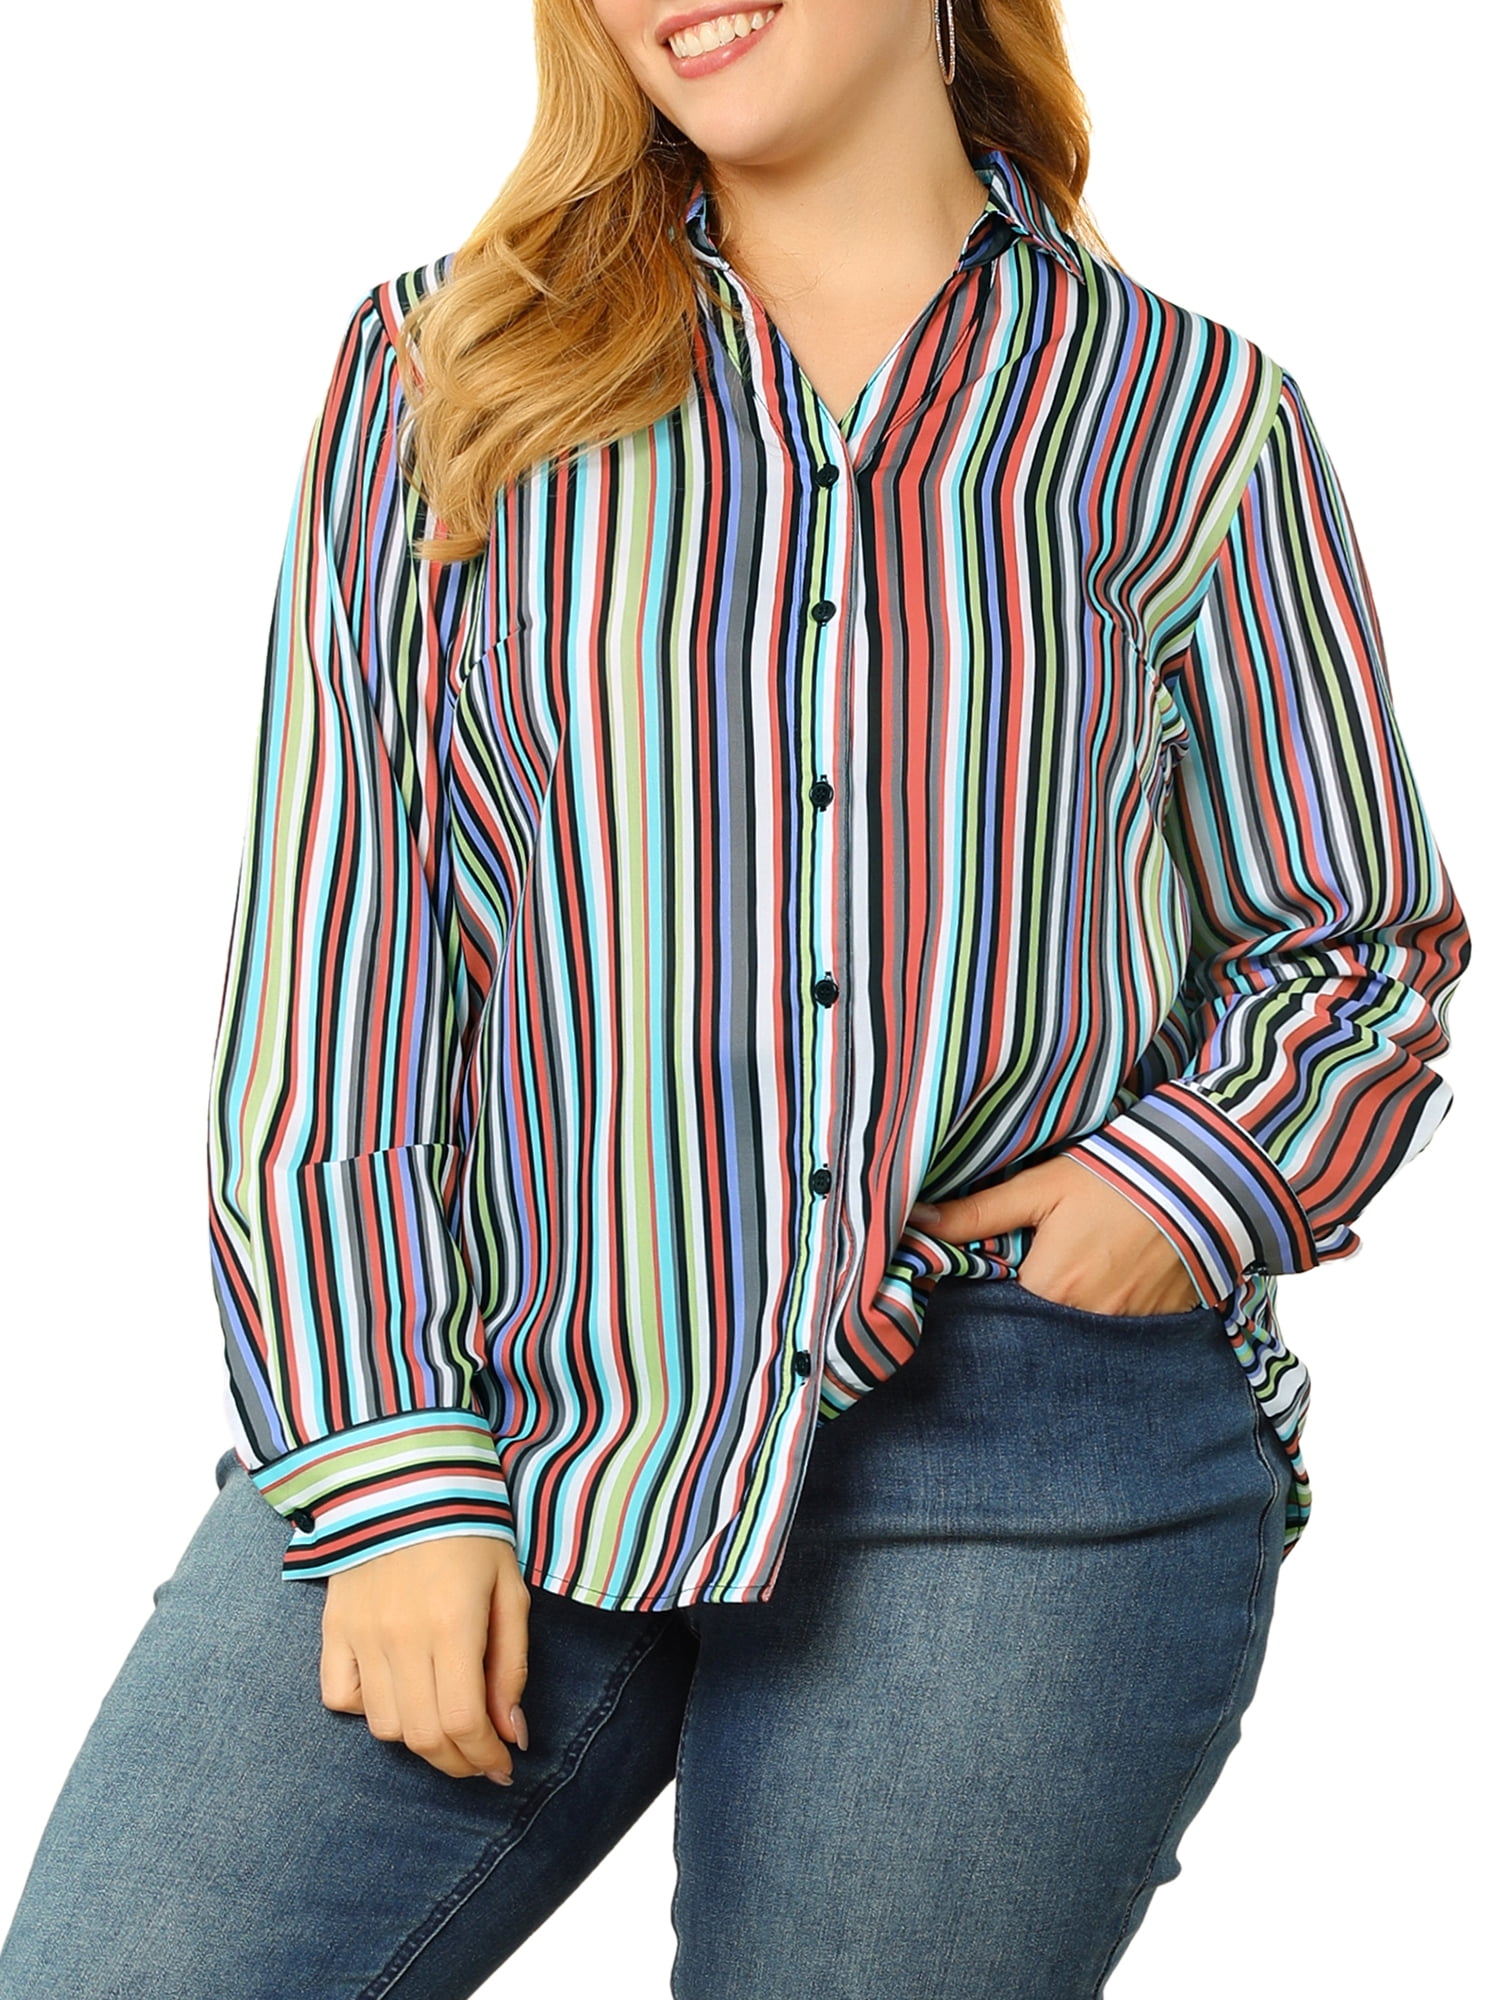 Ladies Plus Size Tunic Pink Striped Shirt Blouse Long Sleeves Breast Pockets NEW 